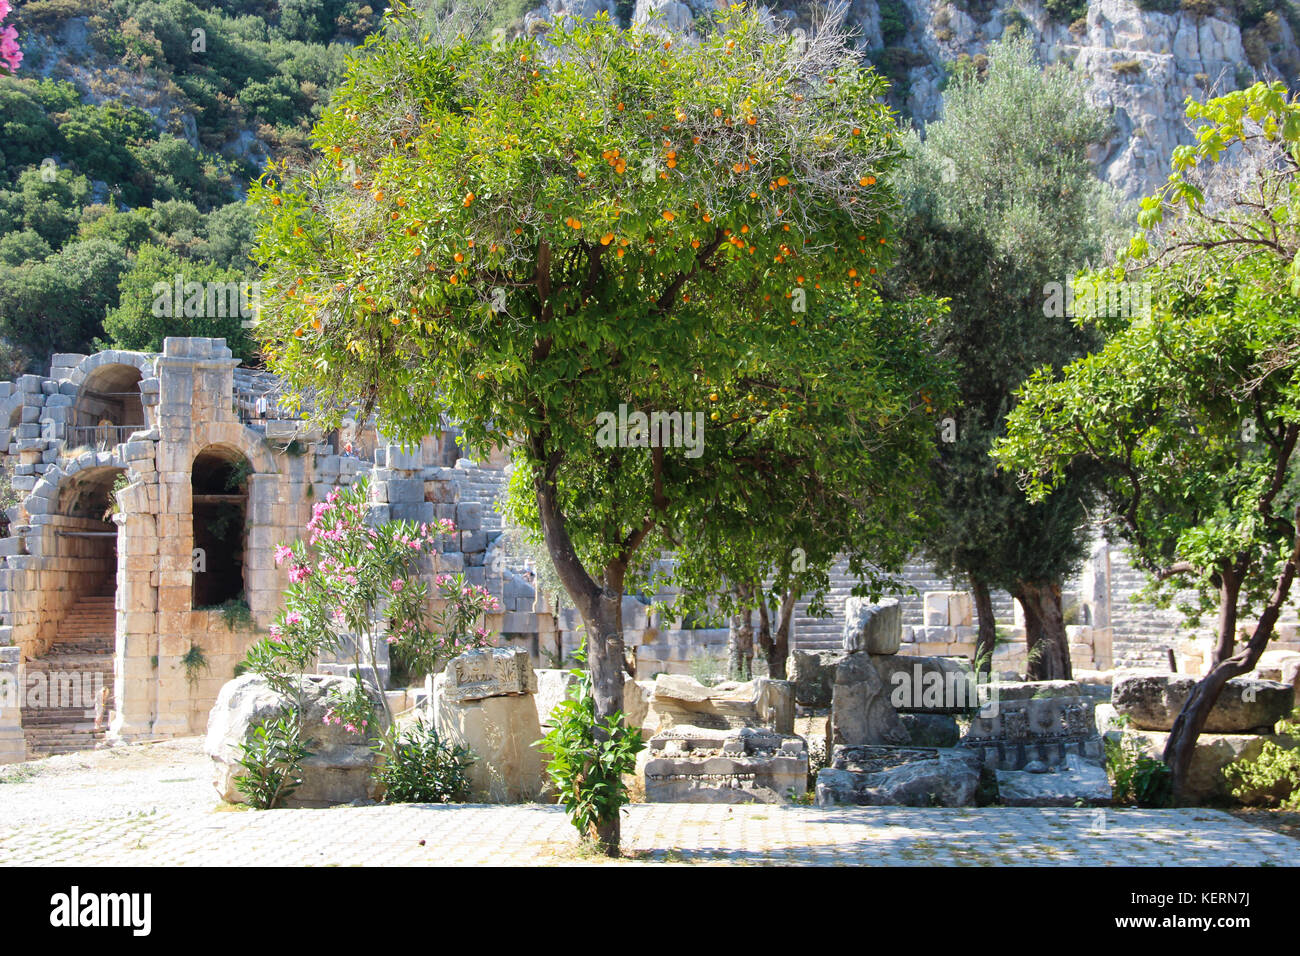 Picturesque views of the ruins of the ancient theater on the background of mountains, flowering trees with purple flowers and fruit of oranges in Myra Stock Photo